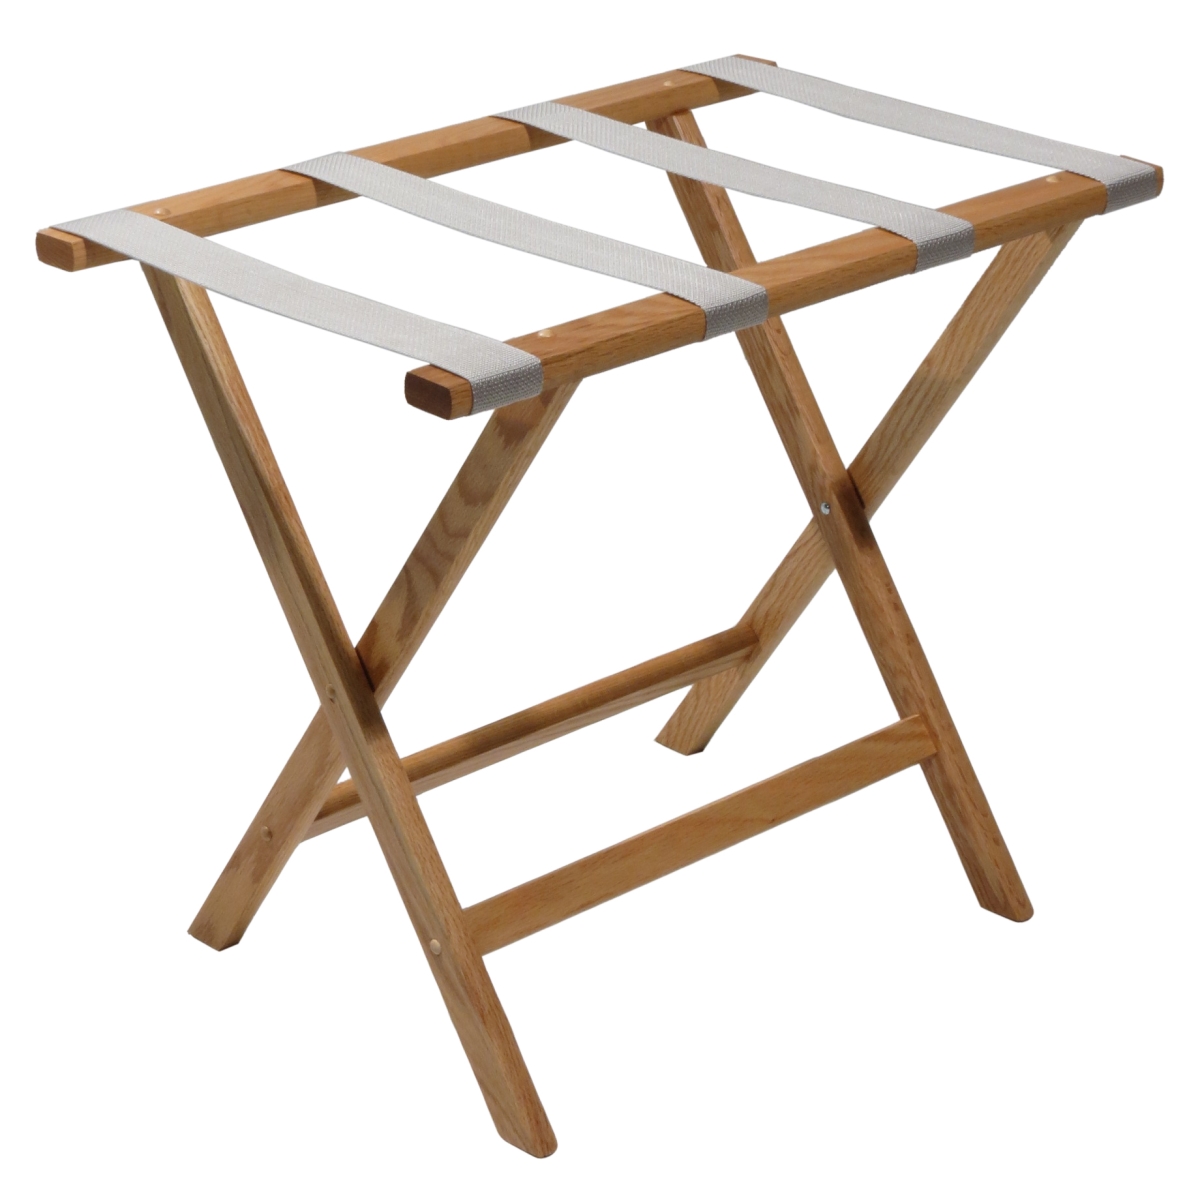 Wooden Mallet LR-LOSVR Deluxe Straight Leg Luggage Rack with Silver Straps - Light Oak